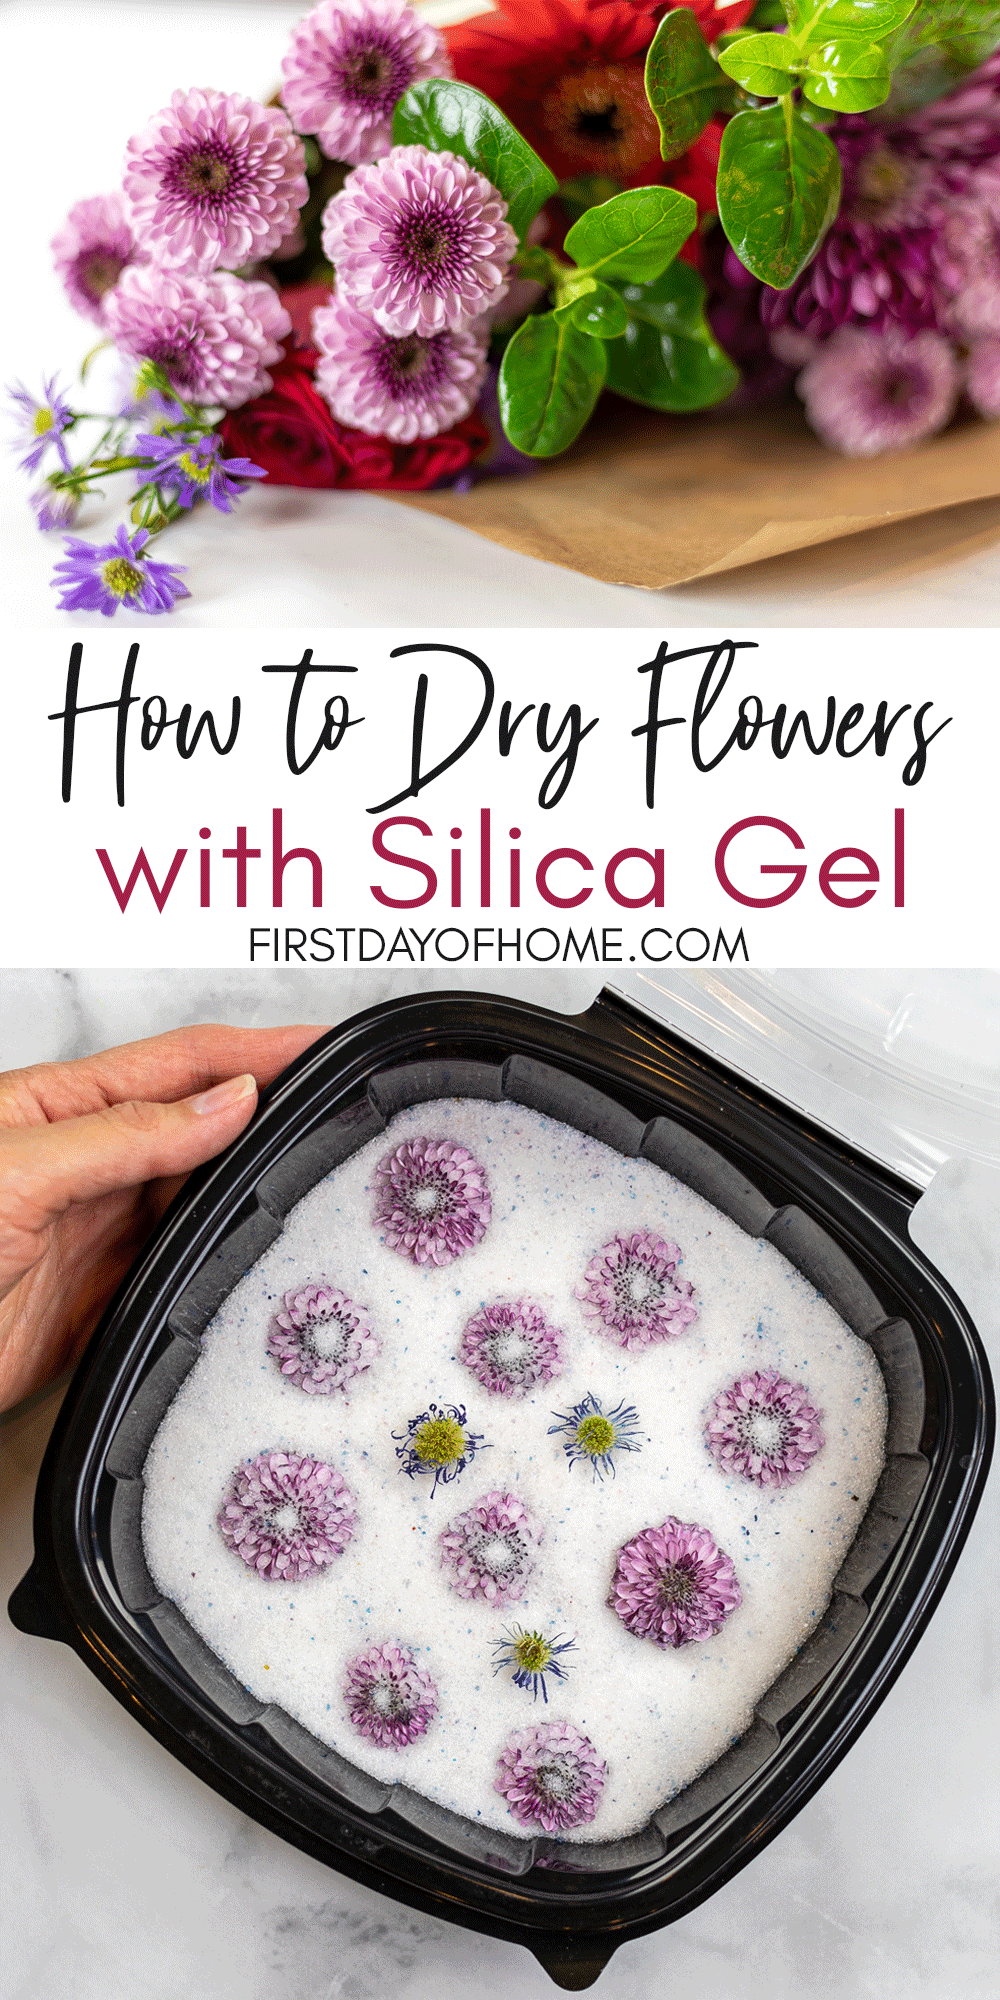 Drying flowers with silica gel.